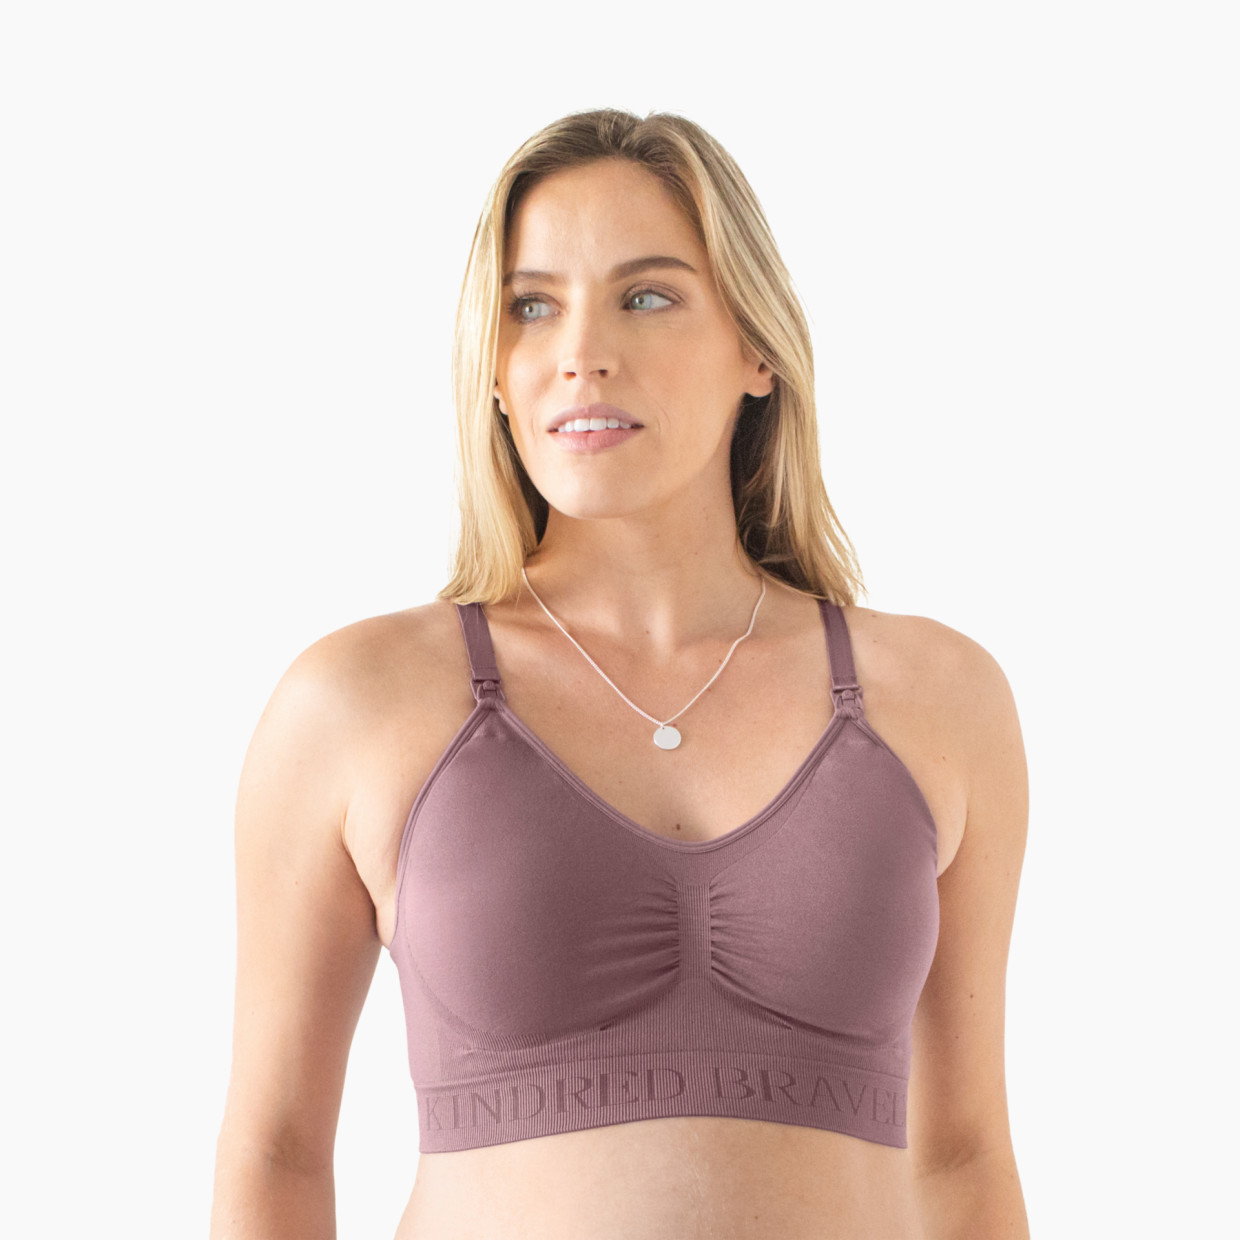 kindred by Kindred Bravely Women's Pumping + Nursing Hands Free Bra - Soft  Pink XXL-Busty